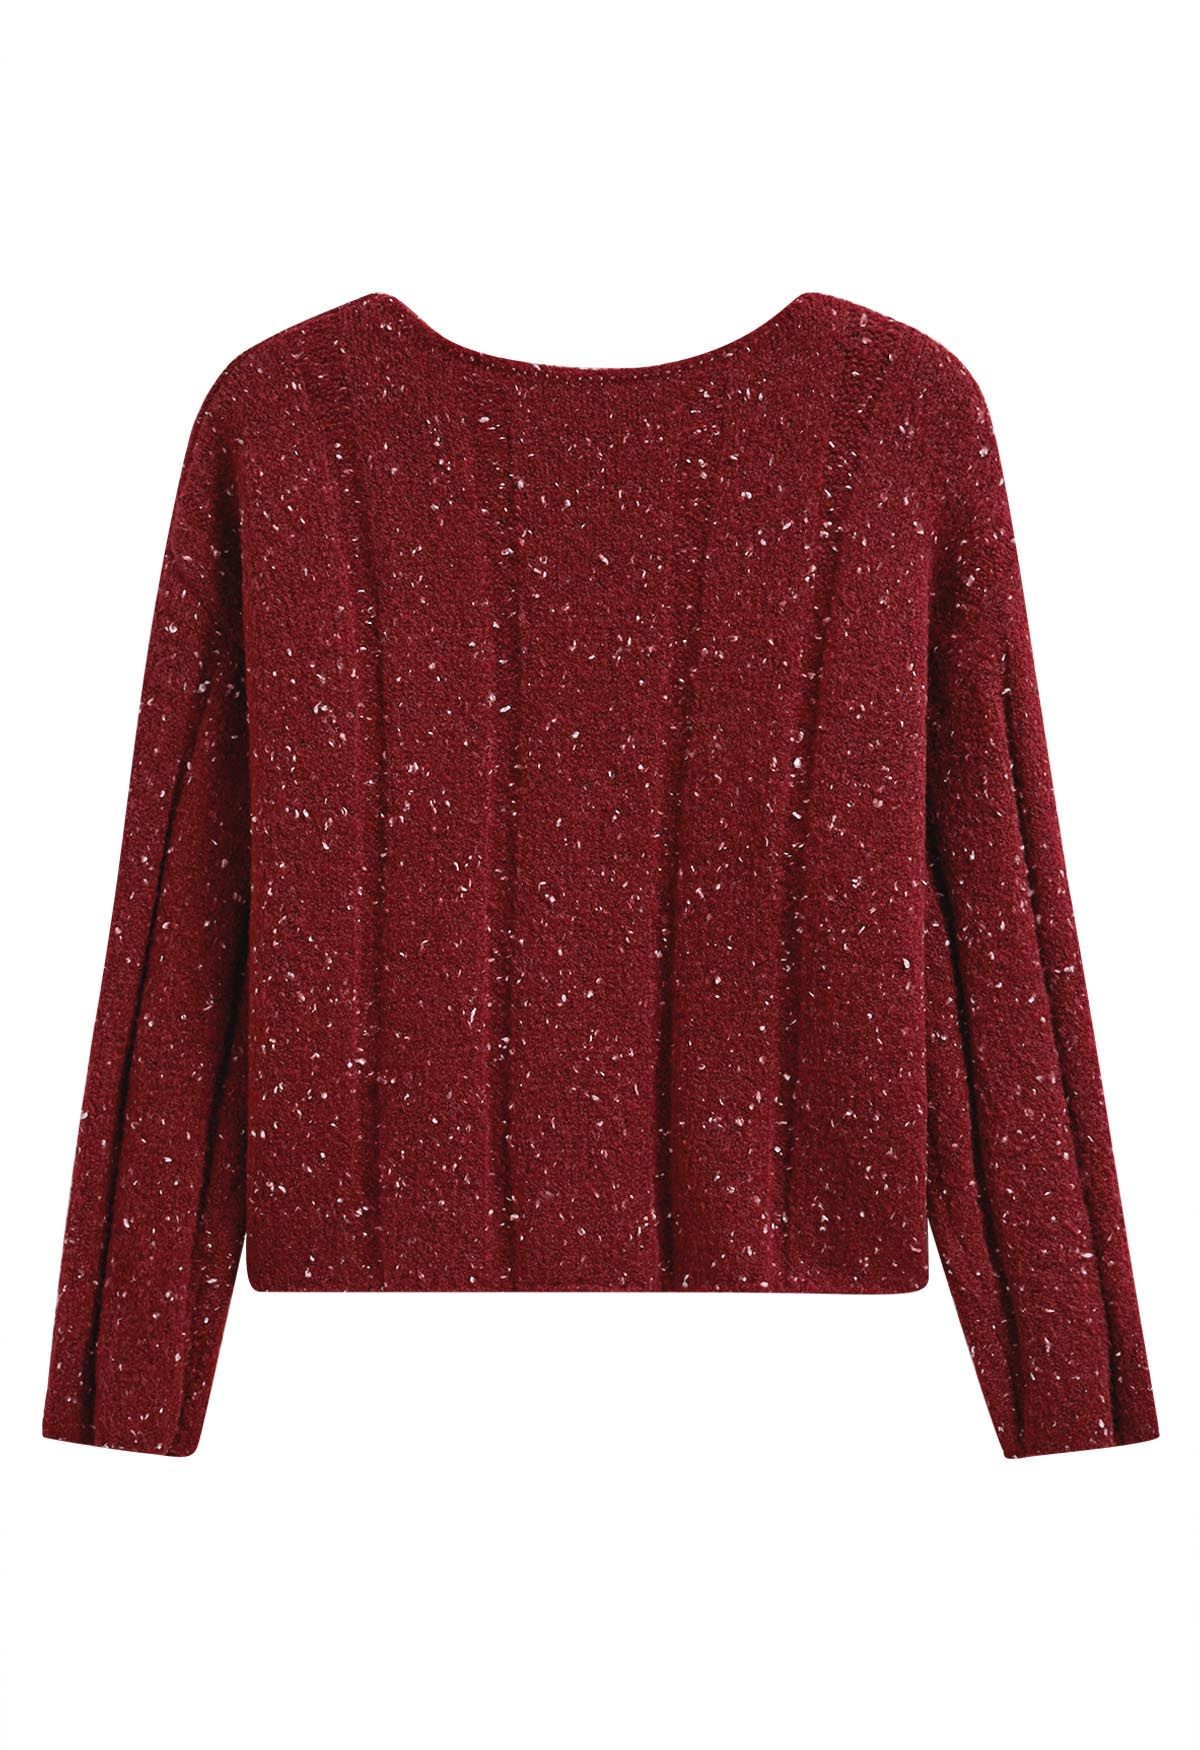 Cozy Drop Shoulder Mixed Knit Sweater in Burgundy